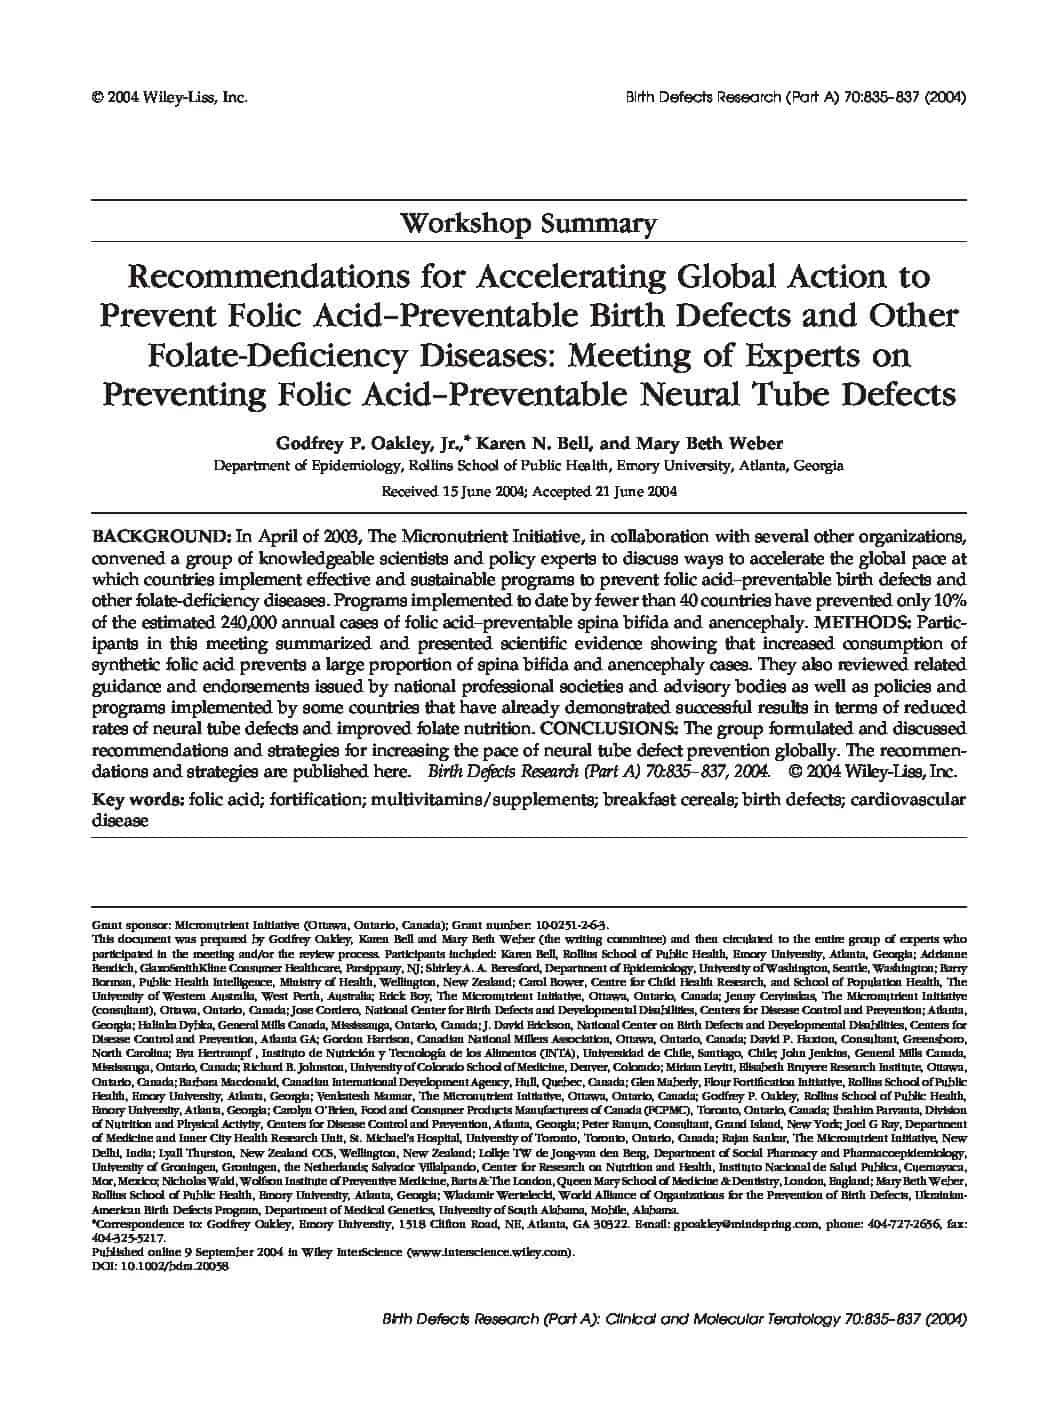 Recommendations for Accelerating Global Action to Prevent Folic Acid – Preventable Birth Defects and Other Folate-Deficiency Diseases: Meeting of Experts on Preventing Folic Acid-Preventable Neural Tube Defects thumbnail